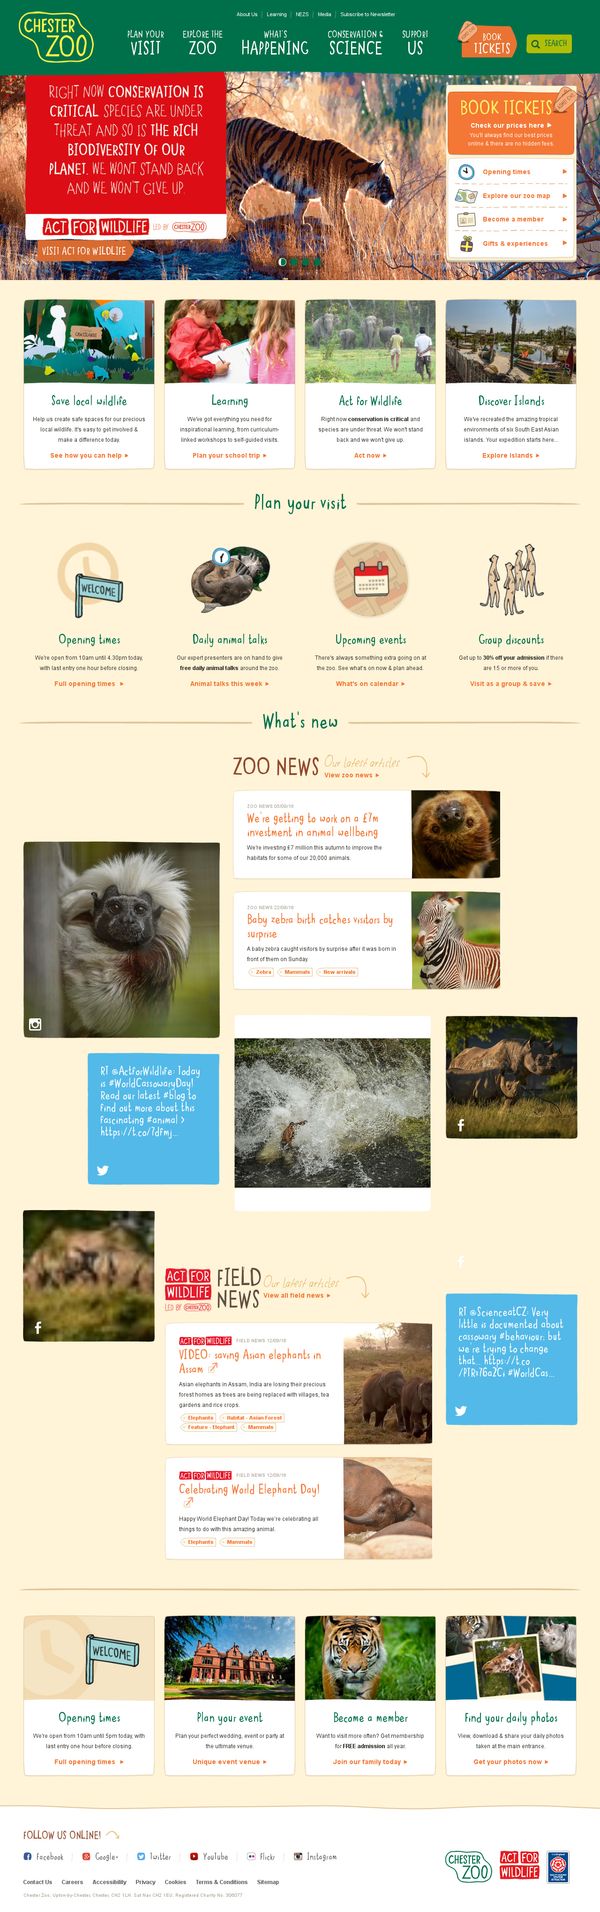 Inspiration - Chester Zoo